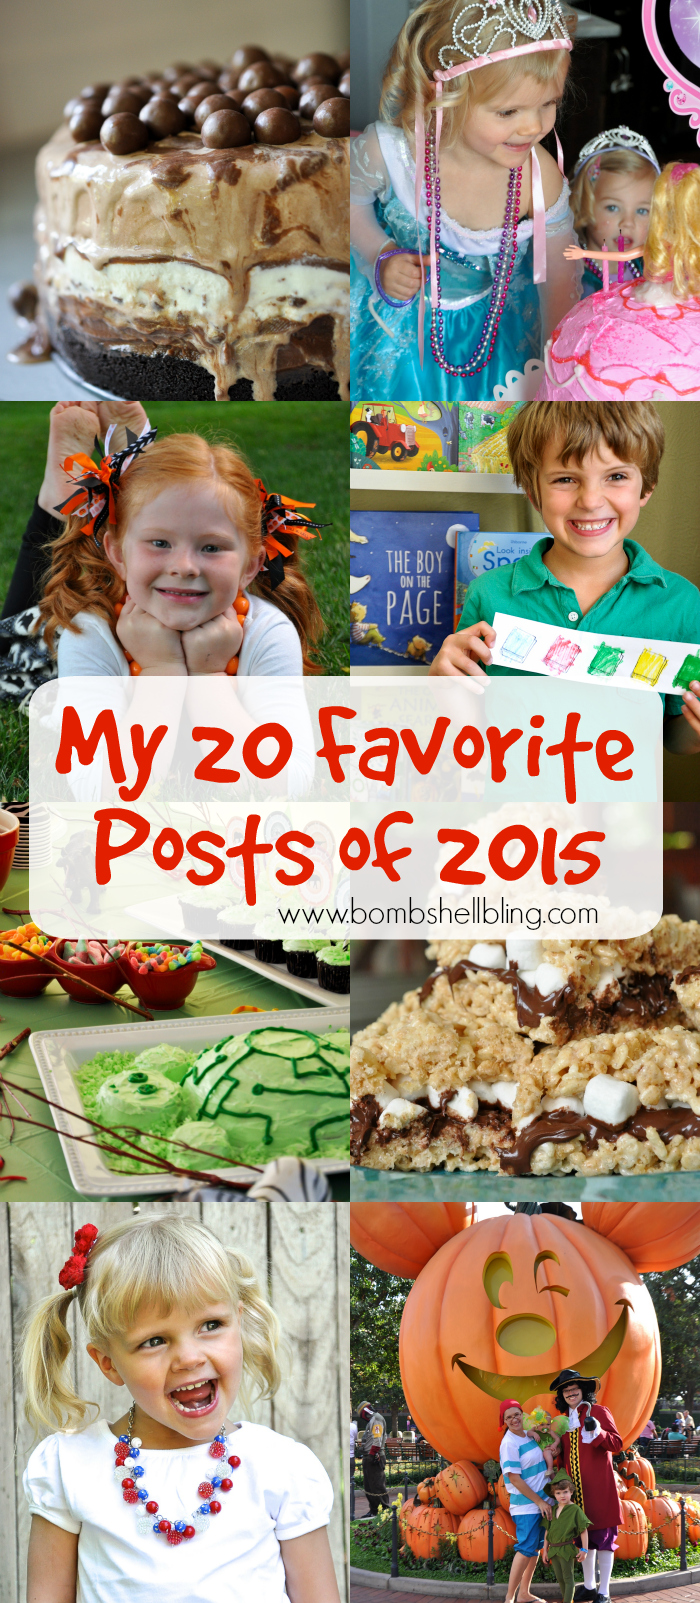 My 20 Favorite Posts of 2015